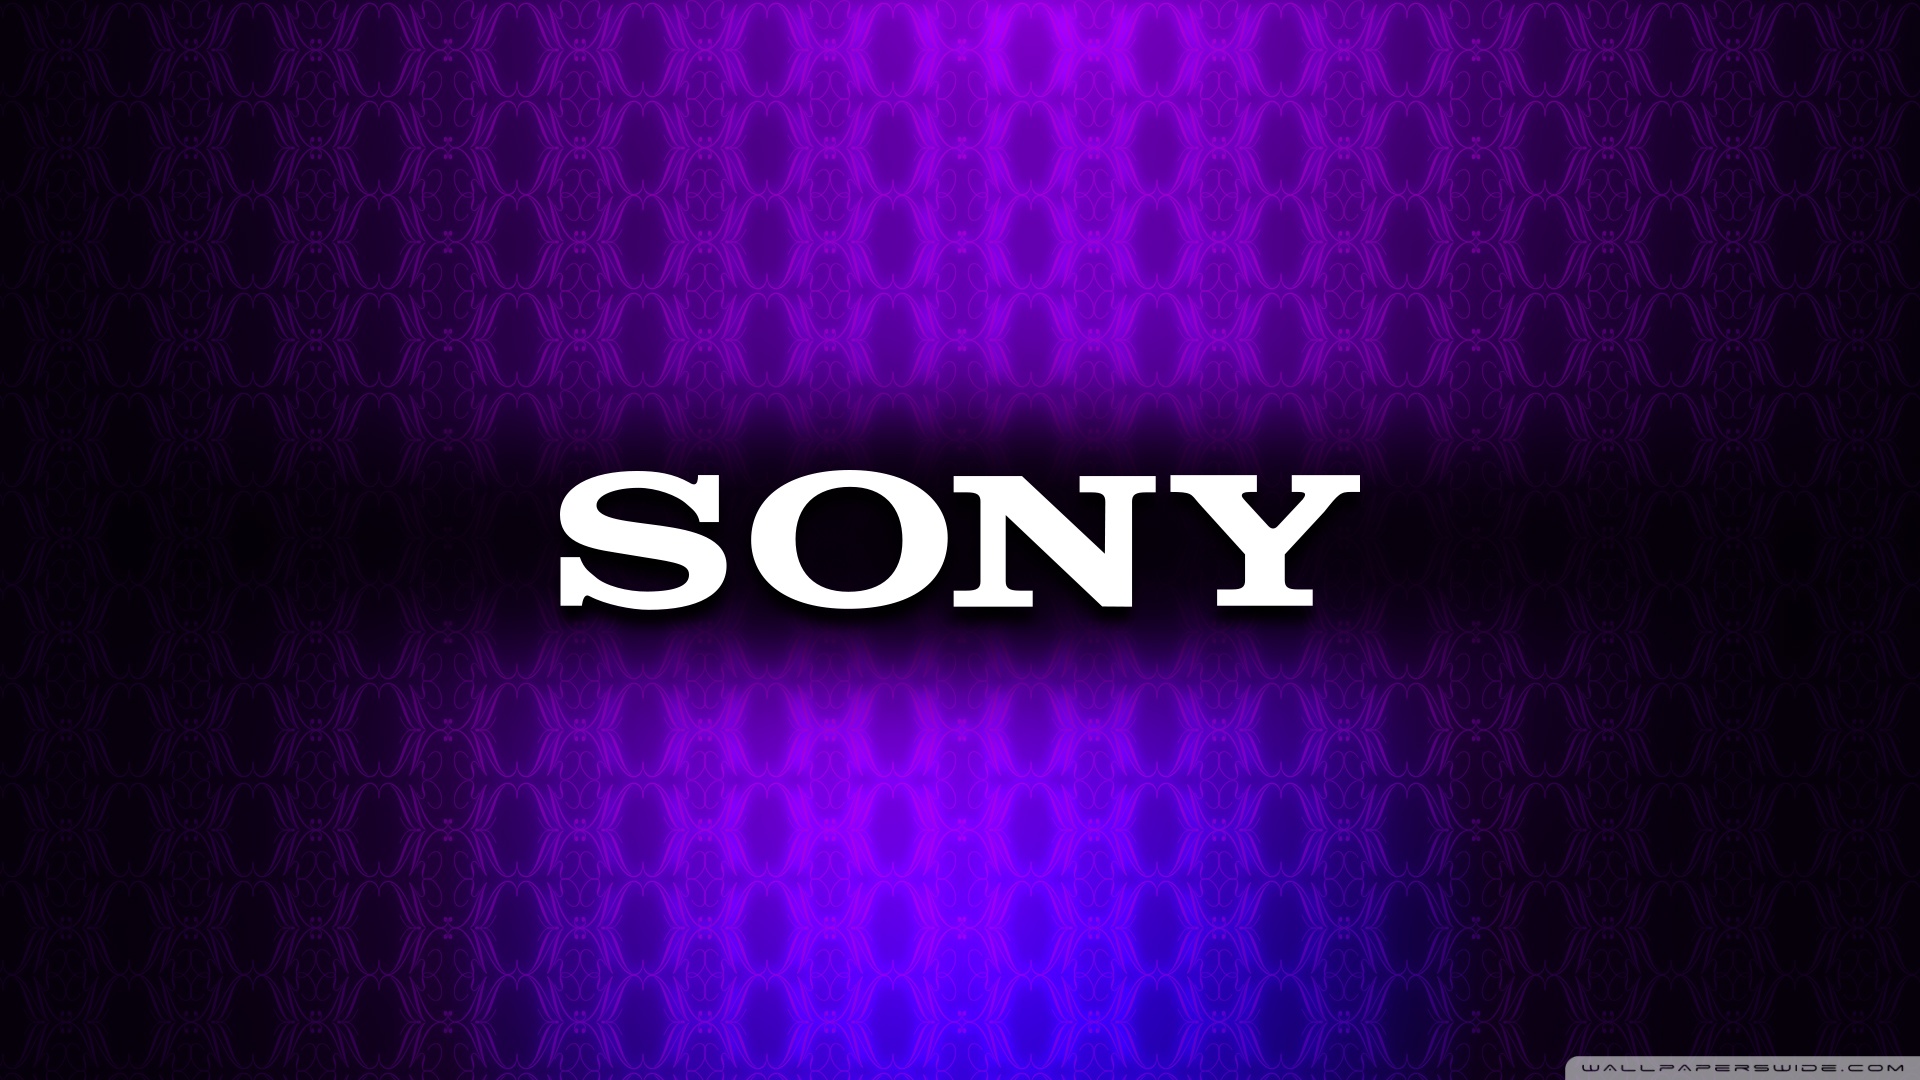 Related Wallpapers - Sony Wallpaper Hd , HD Wallpaper & Backgrounds